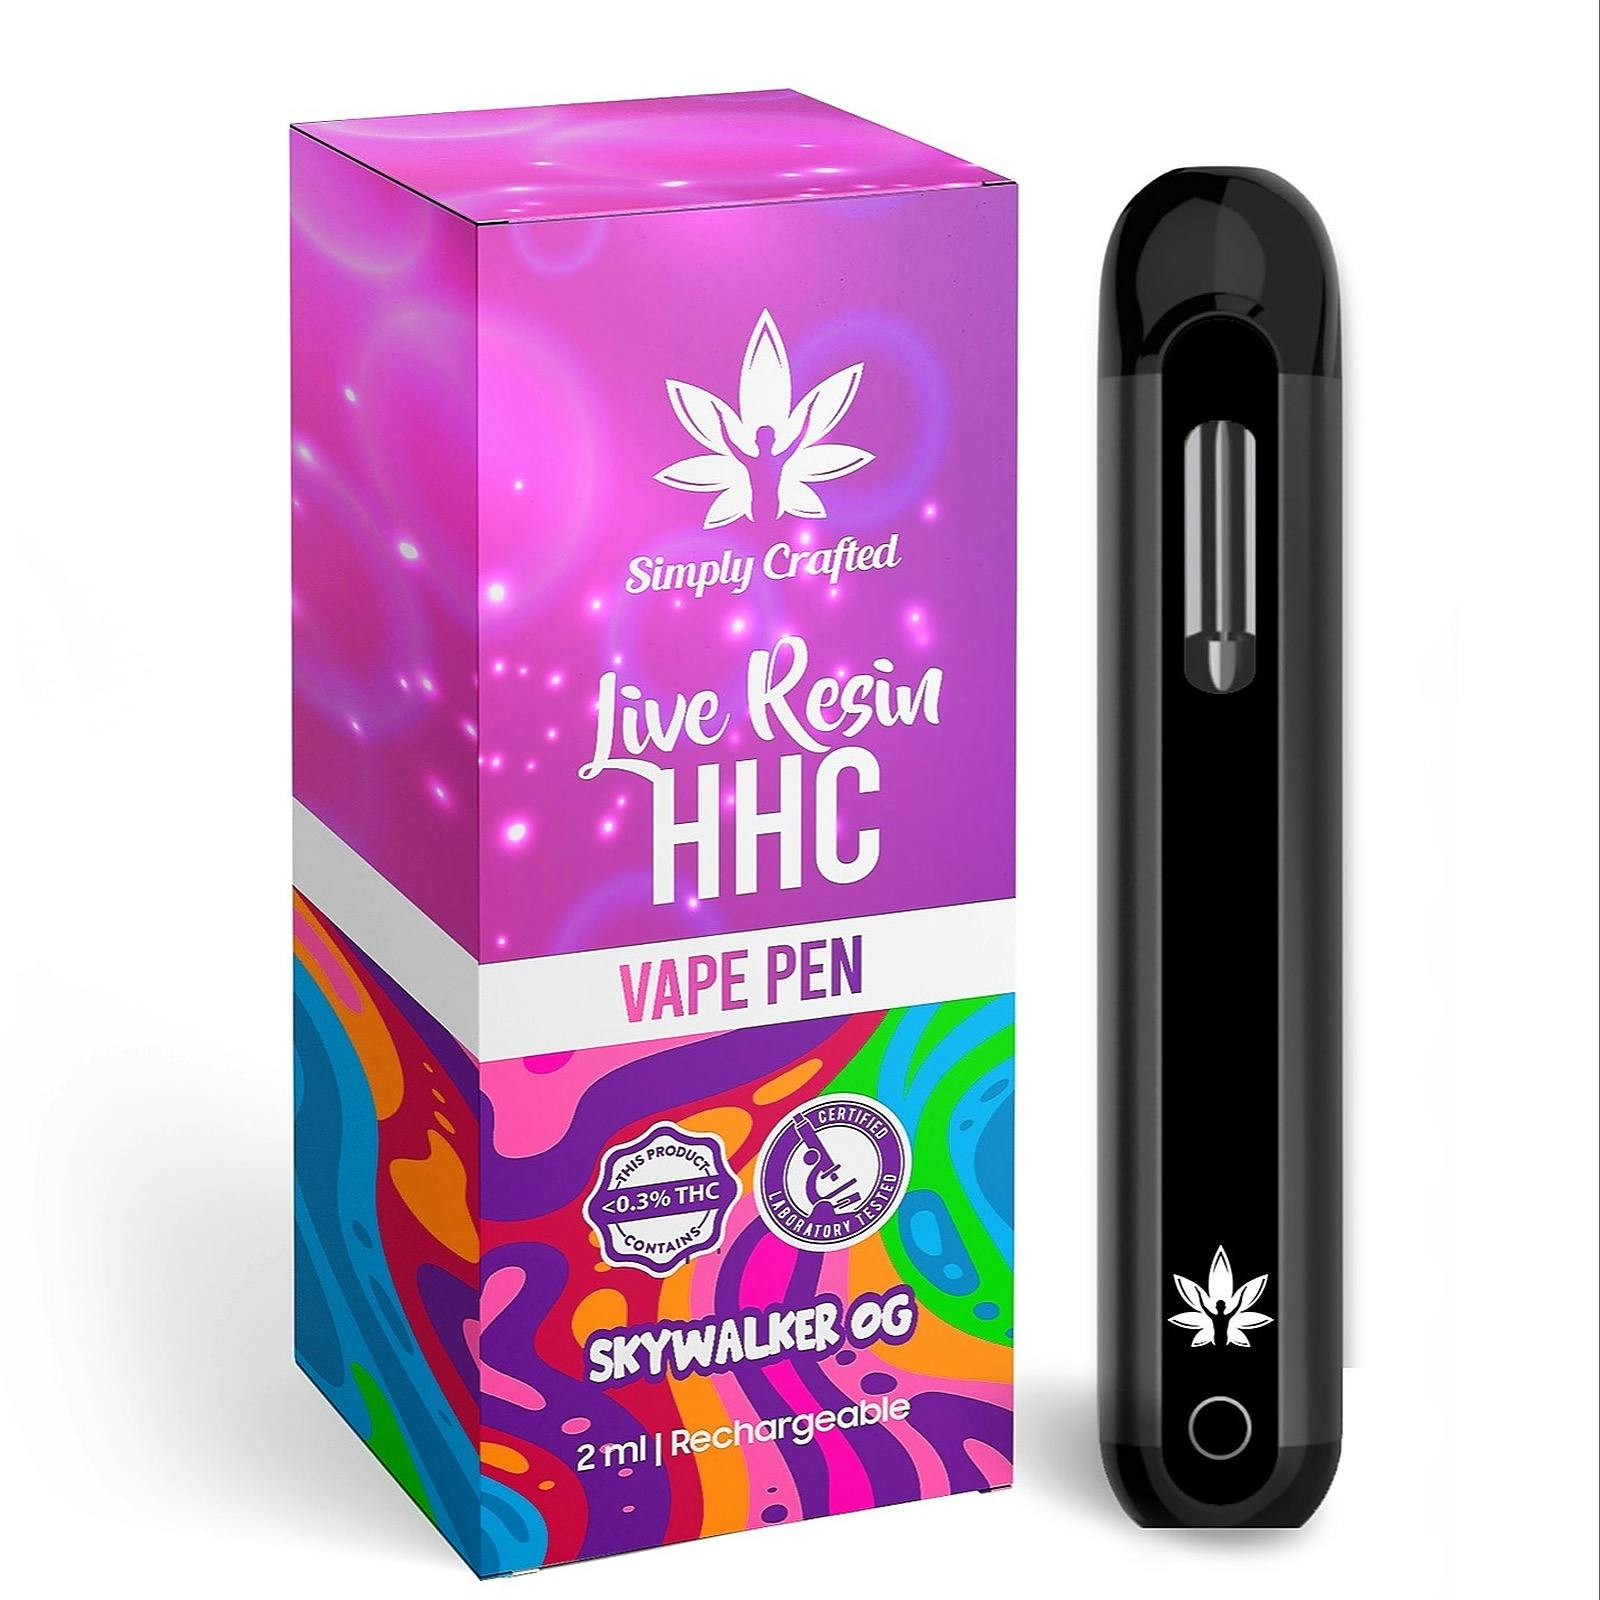 Simply Crafted Free Shipping Save 25 With Code Leafly Skywalker Og 2ml Hhc Vape Pen Leafly 5326